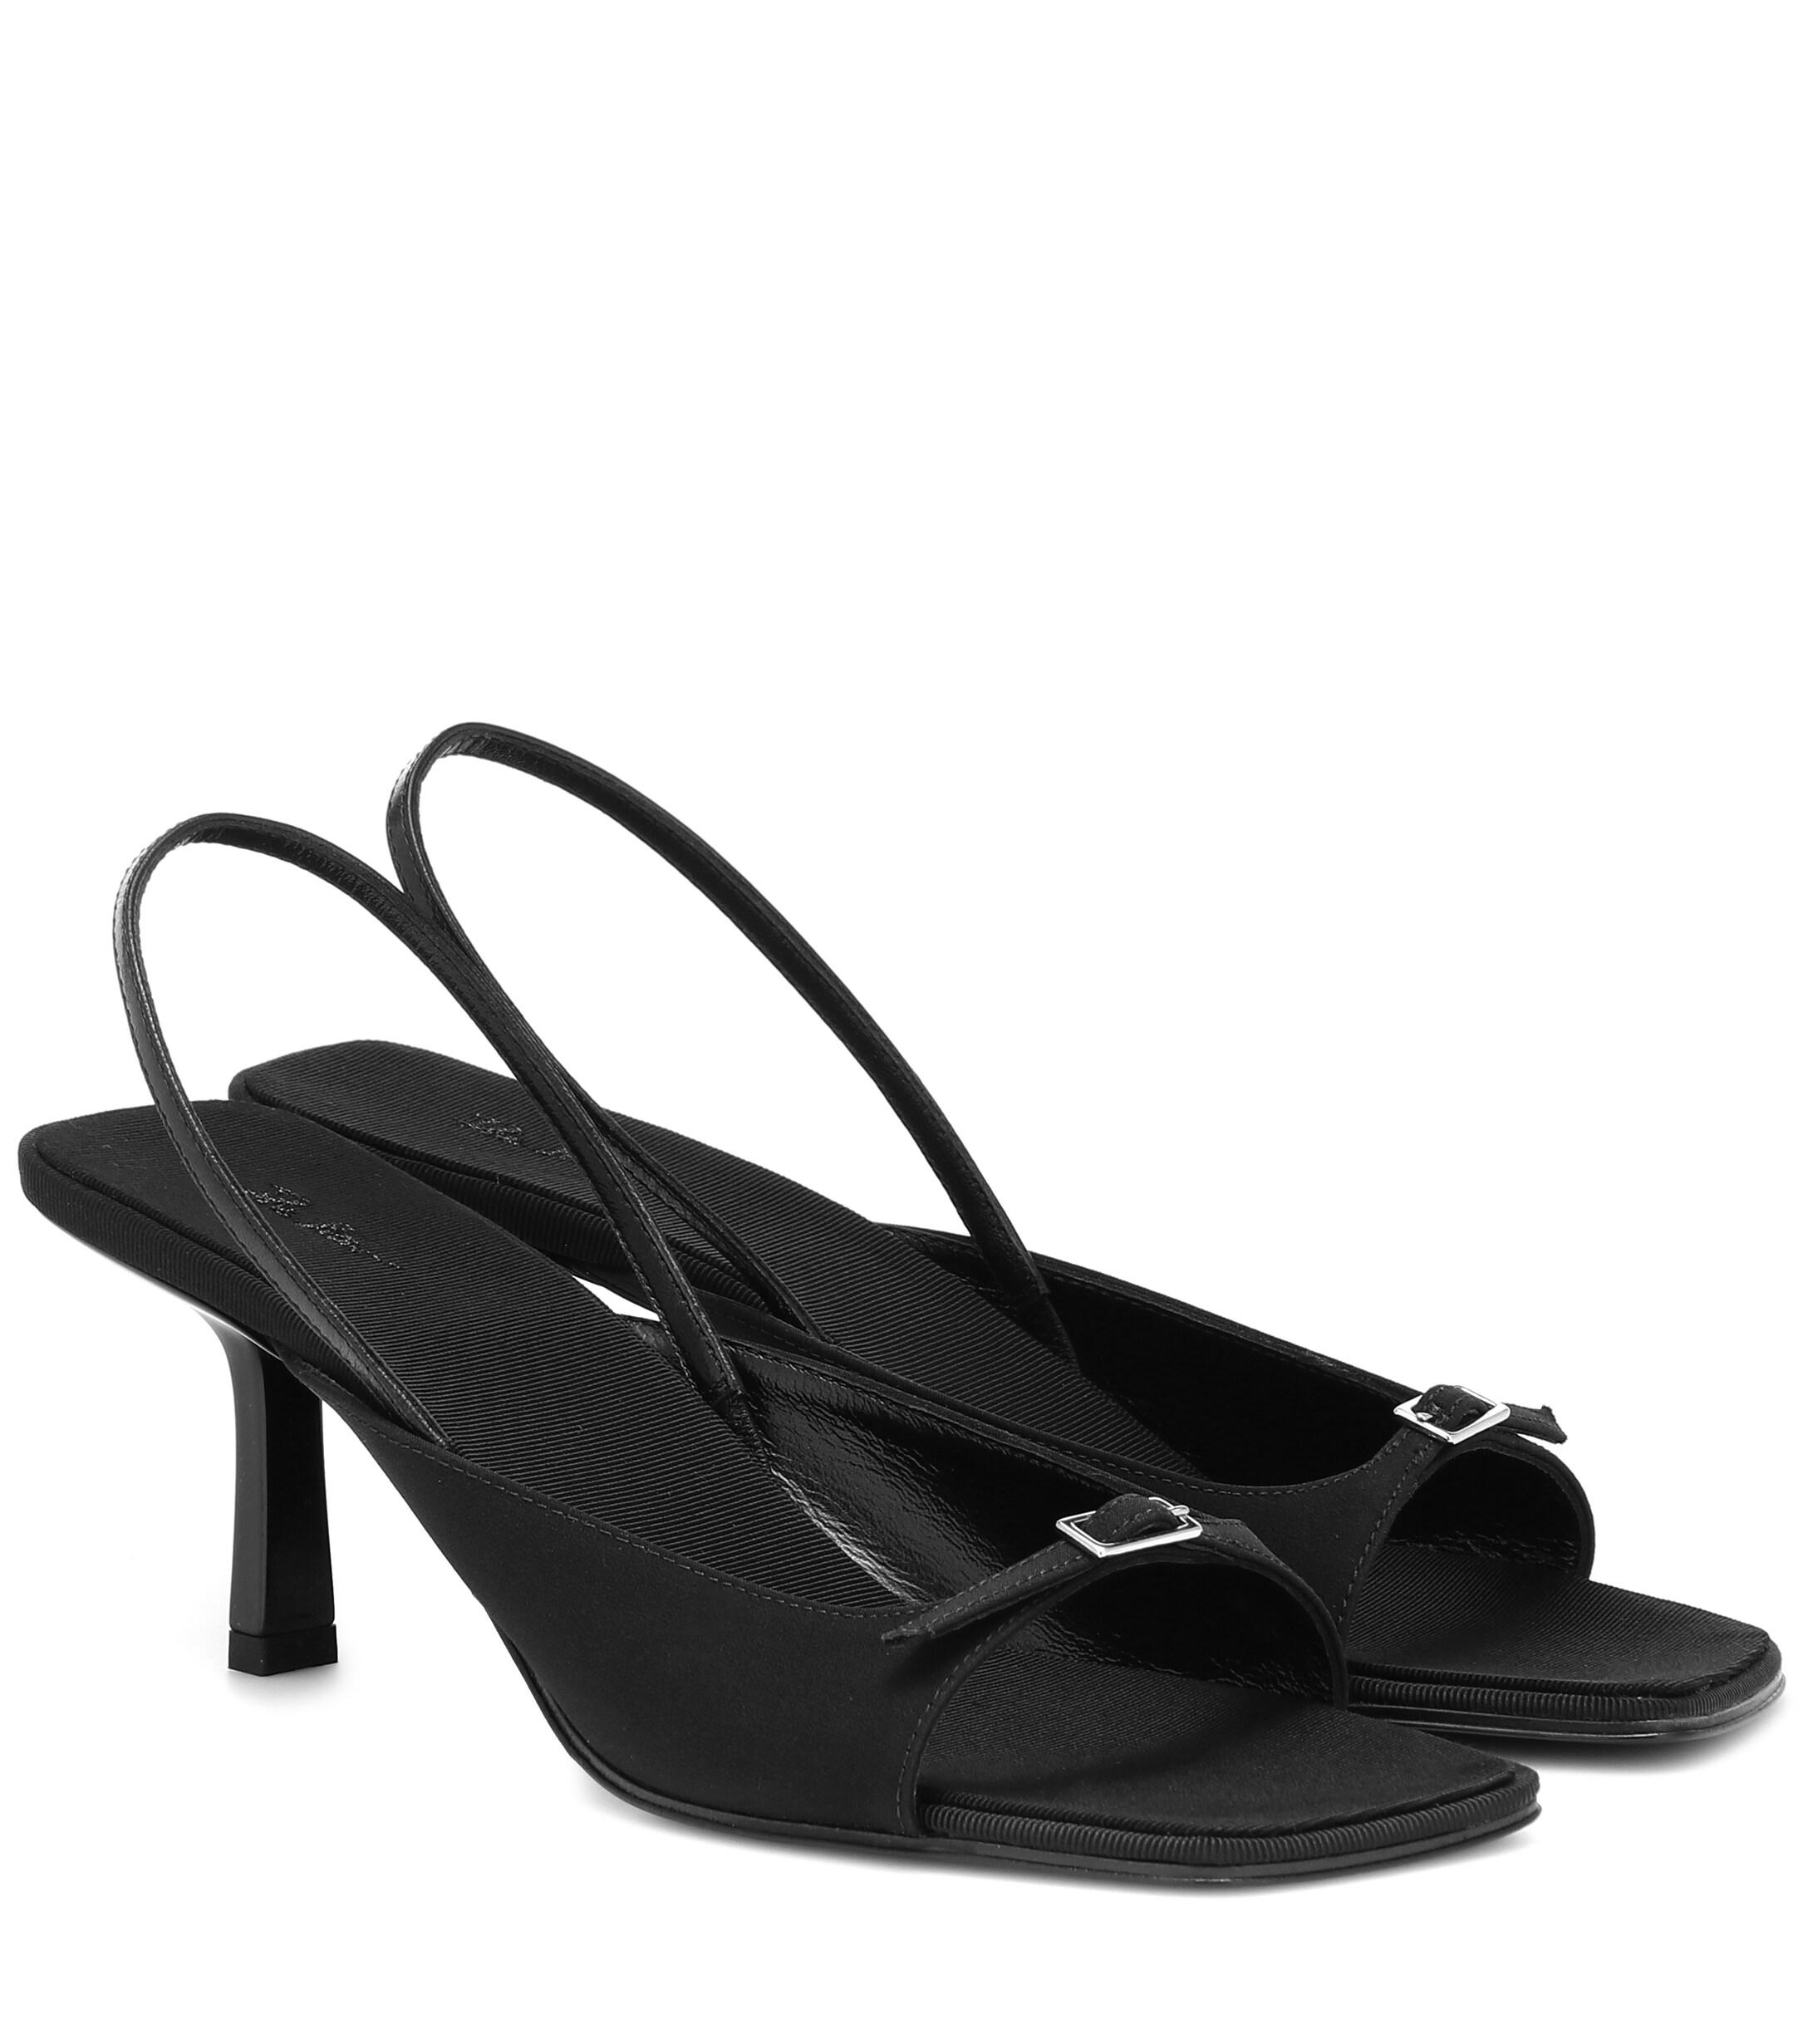 The Row Buckle Sling Crêpe De Chine Sandals in Black | Lyst